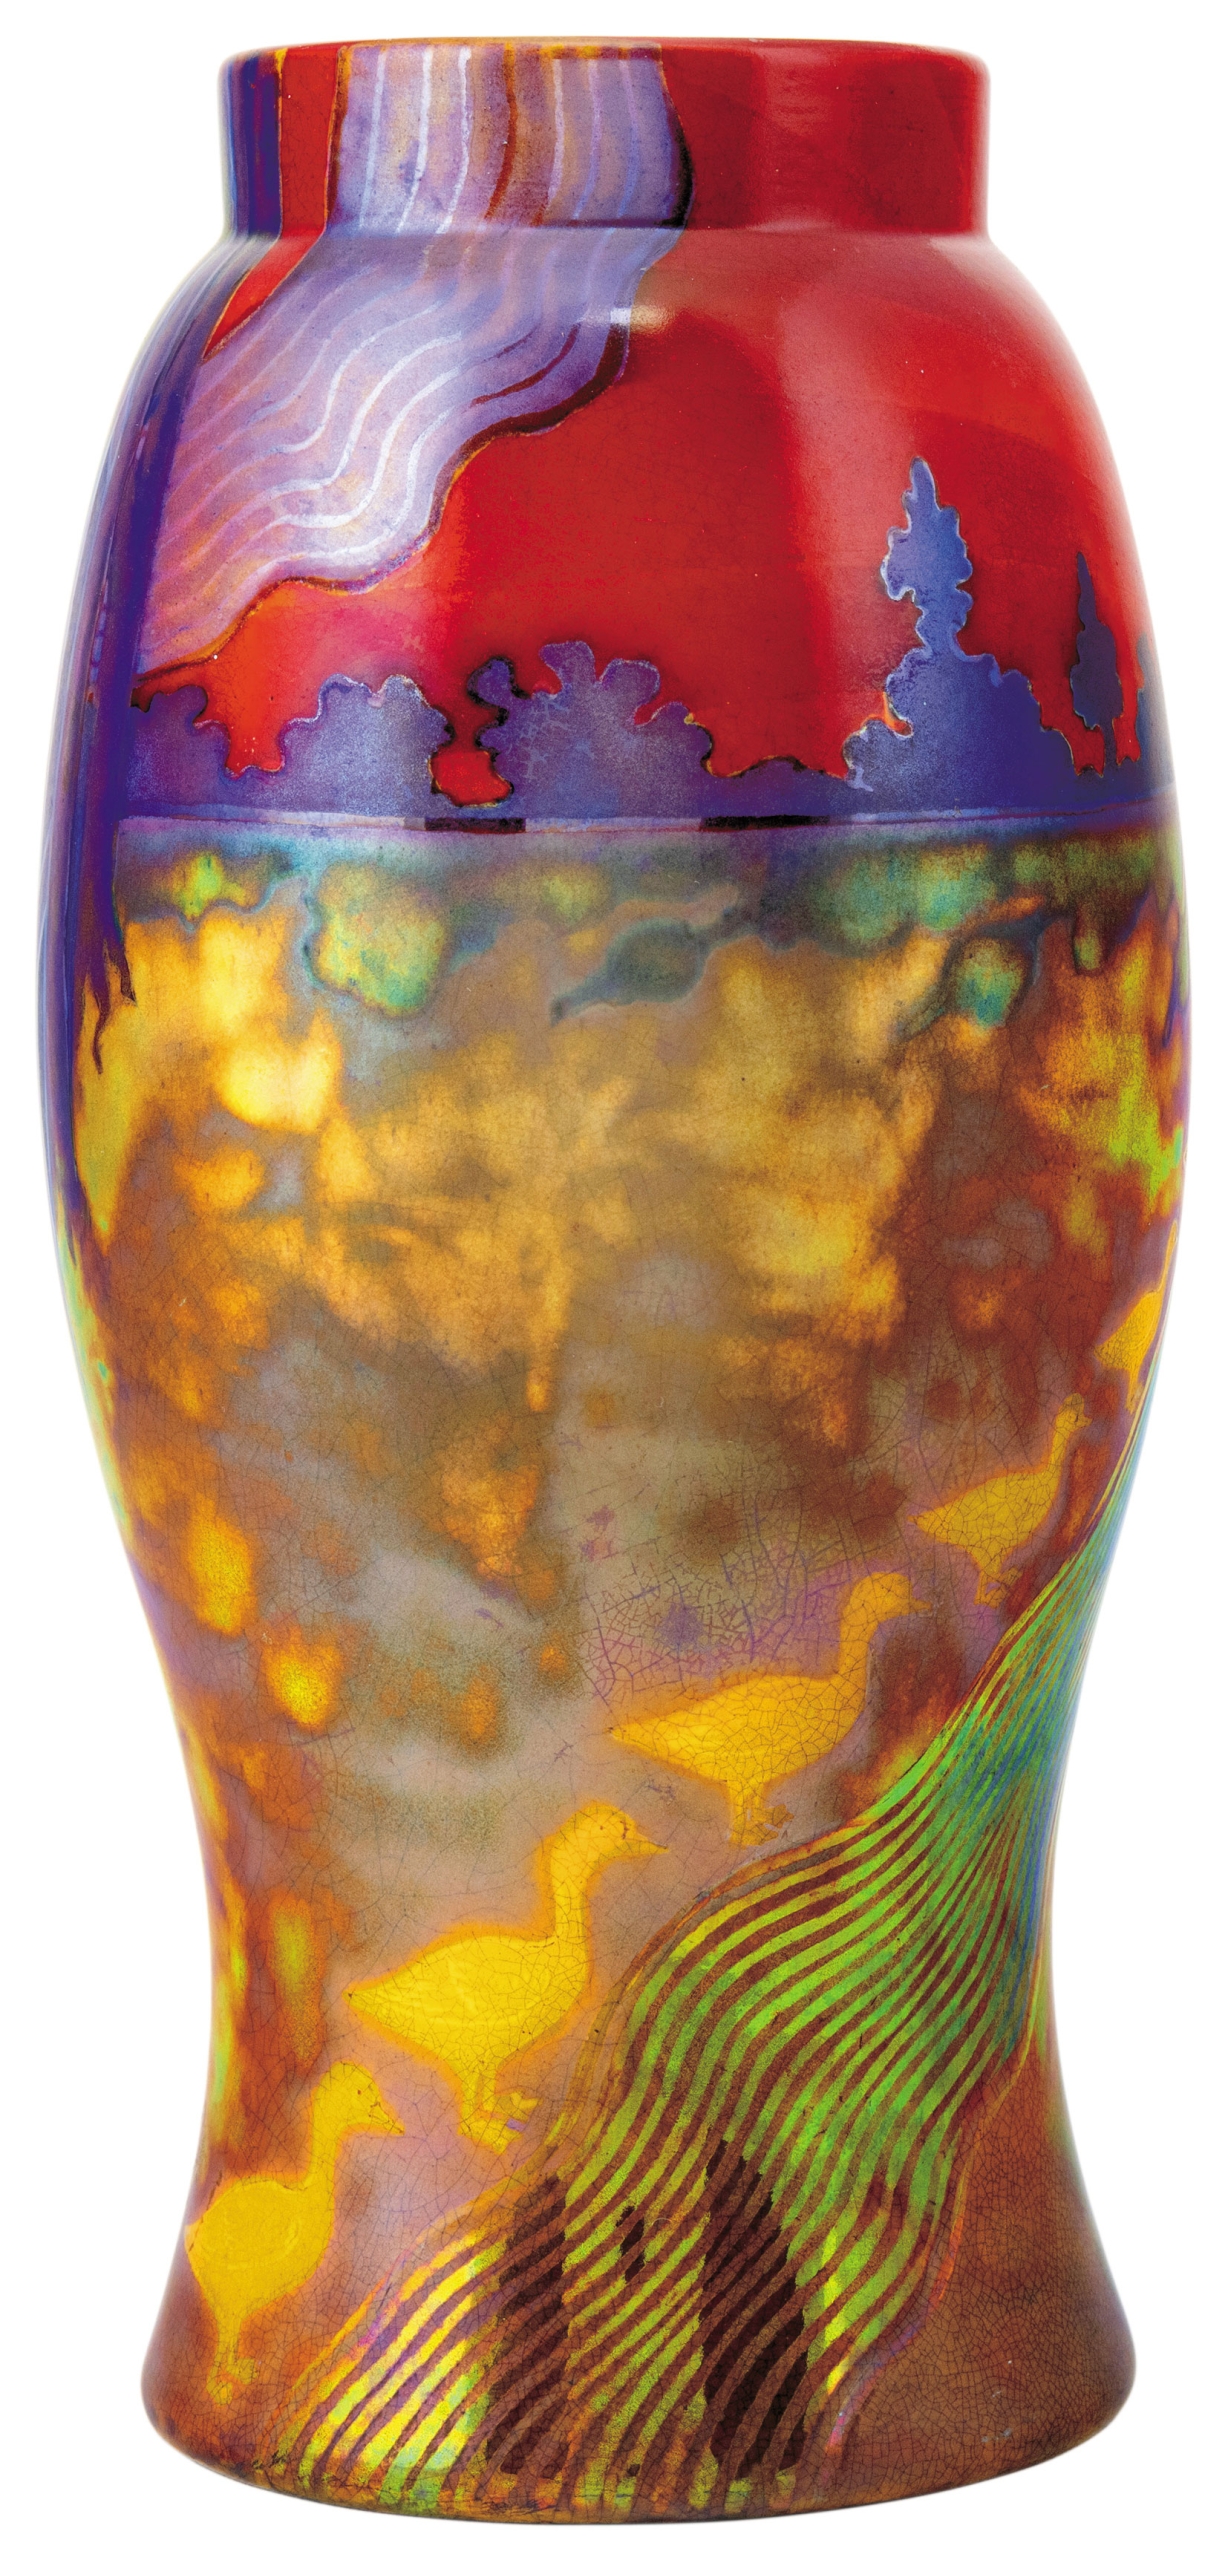 Zsolnay Panoramic Nabis Vase with scenes of sunset, Landscape and Geese, 1899